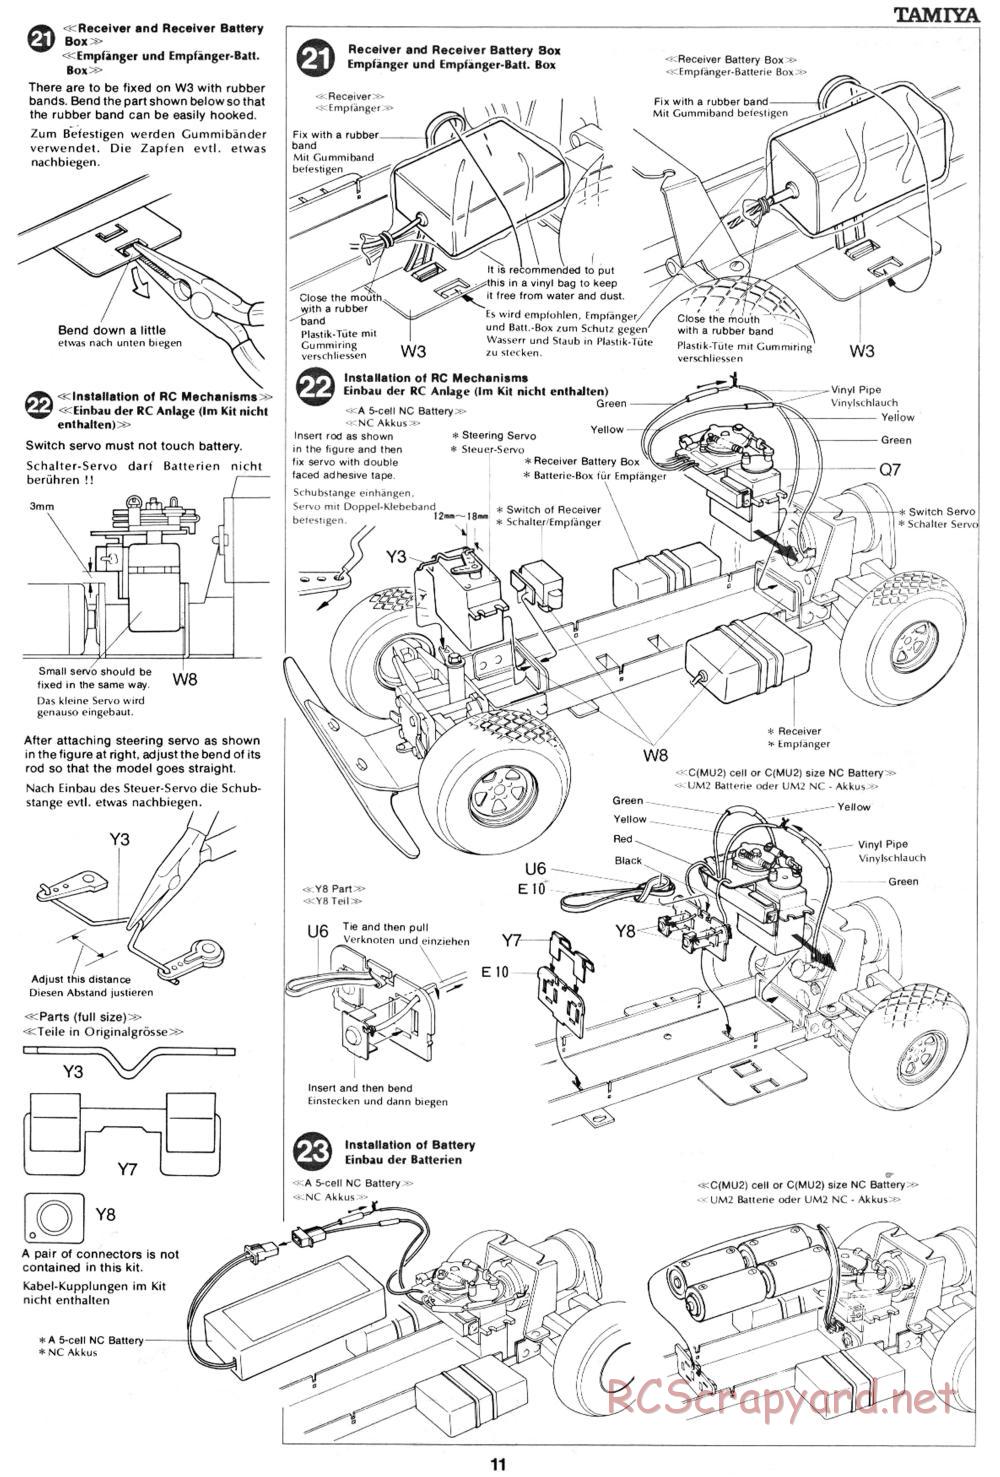 Tamiya - XR311 Combat Support Vehicle (1977) Chassis - Manual - Page 11